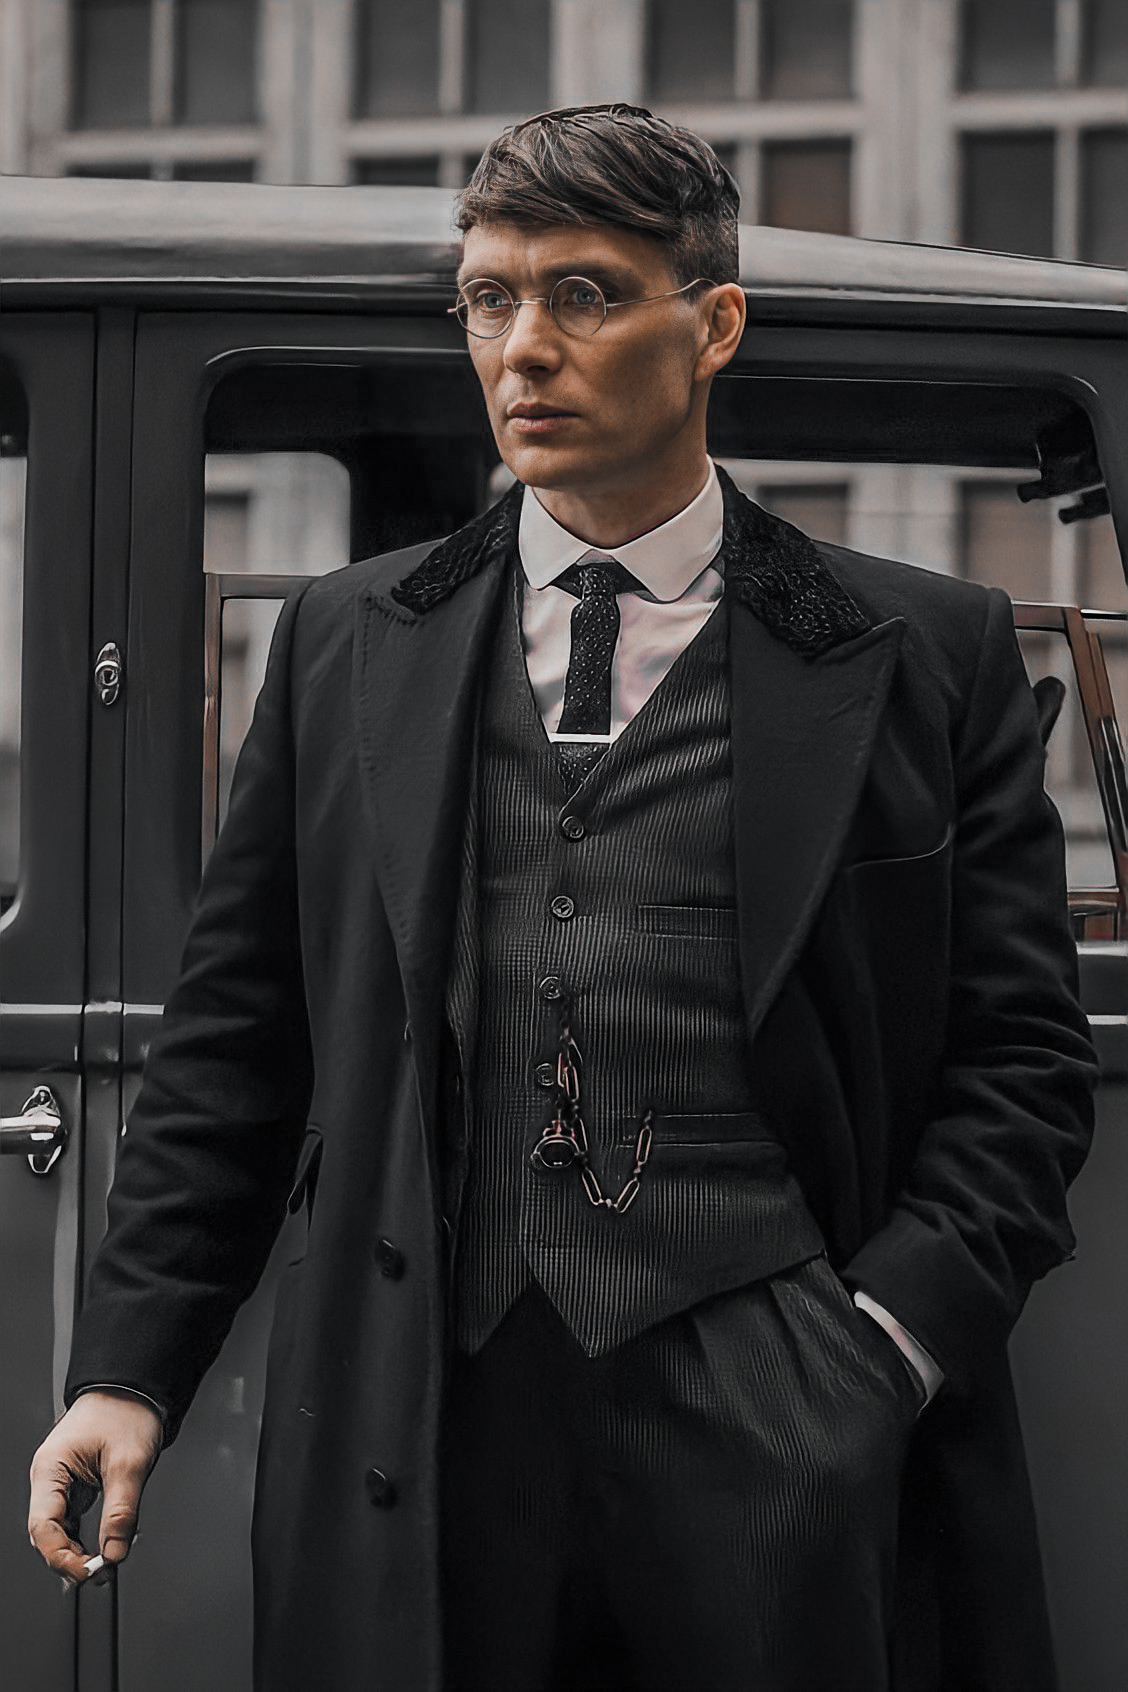 In peaky blinders, when they say, 'in the bleak midwinter,' what do they  mean?